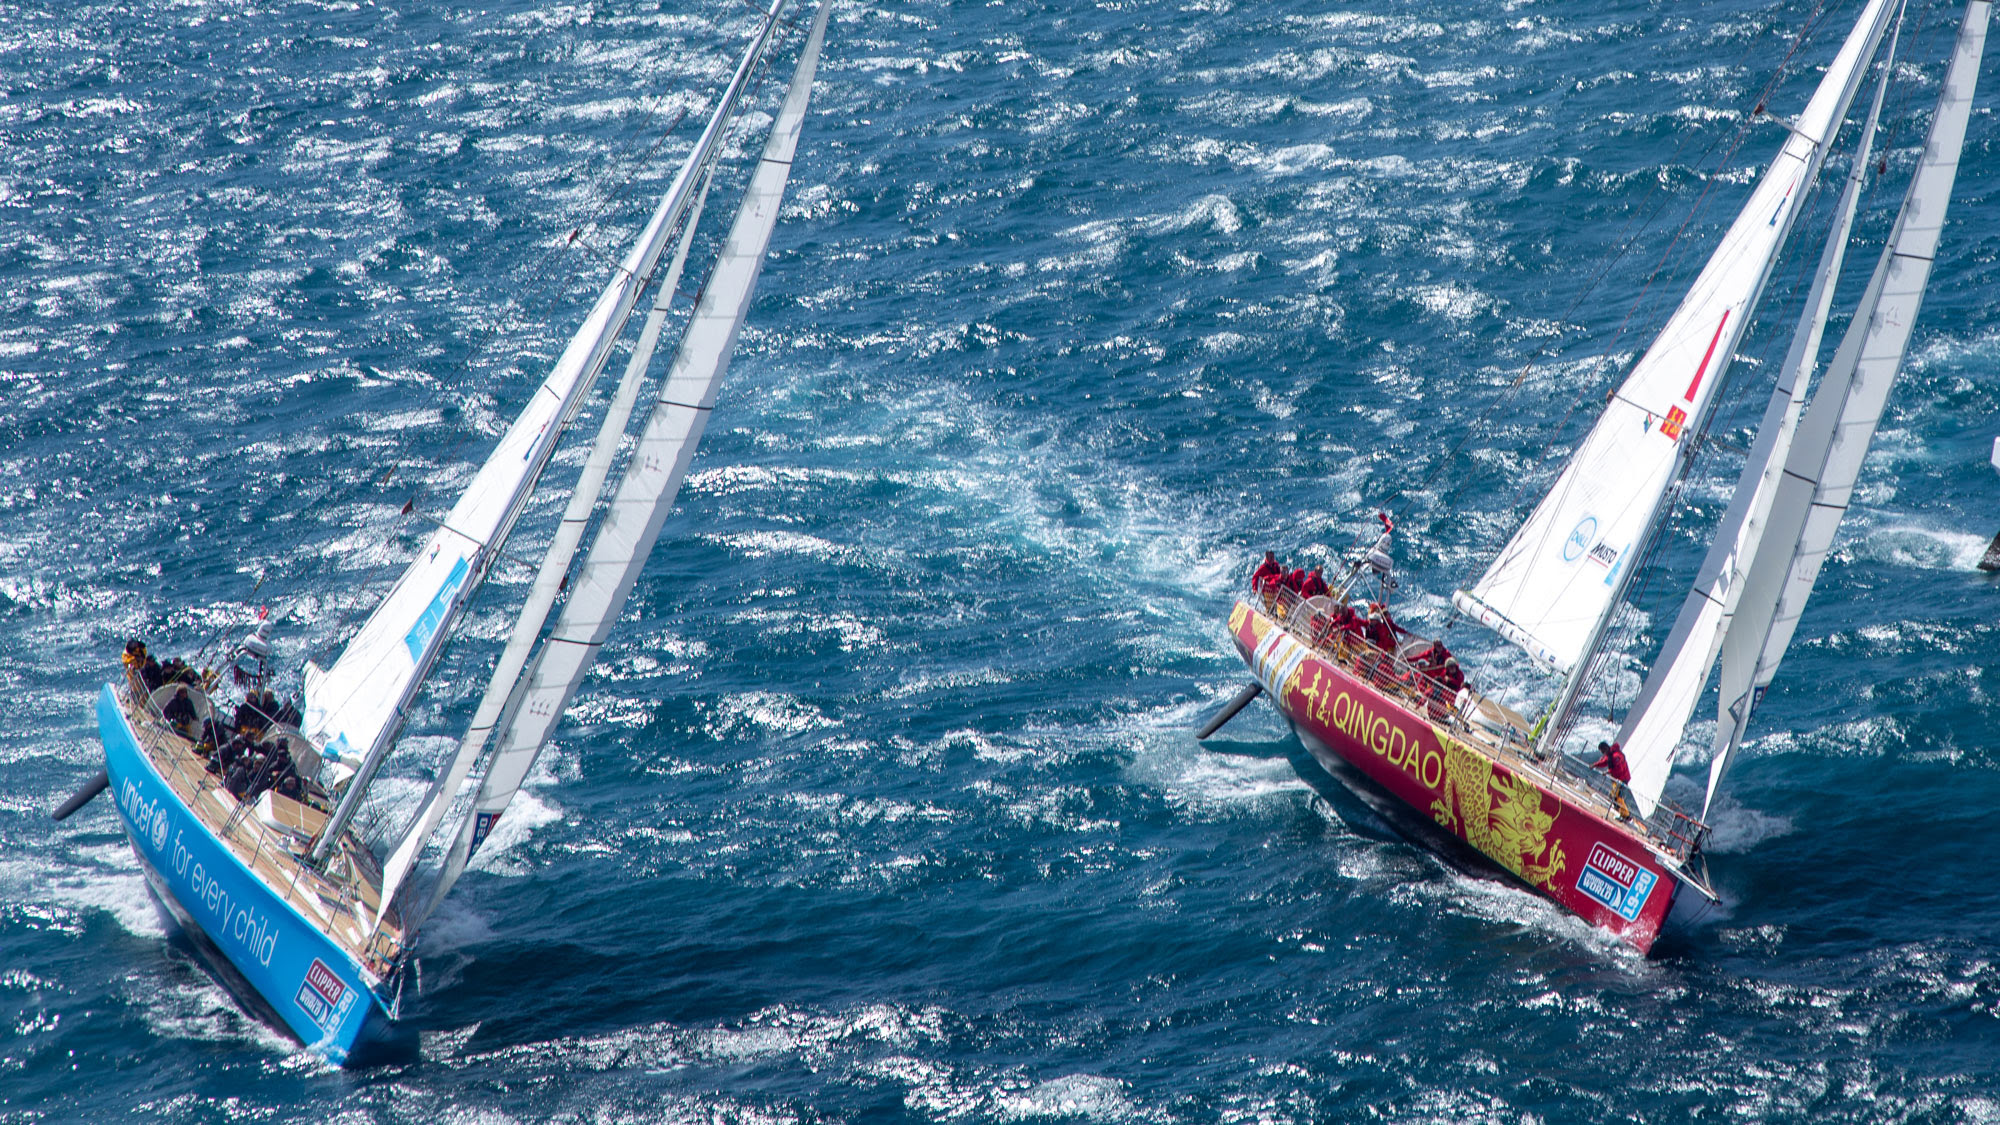 Clipper Race The Zhuhai and Ha Long Bay, Viet Nam team yachts battle it out on Table Bay, Cape Town